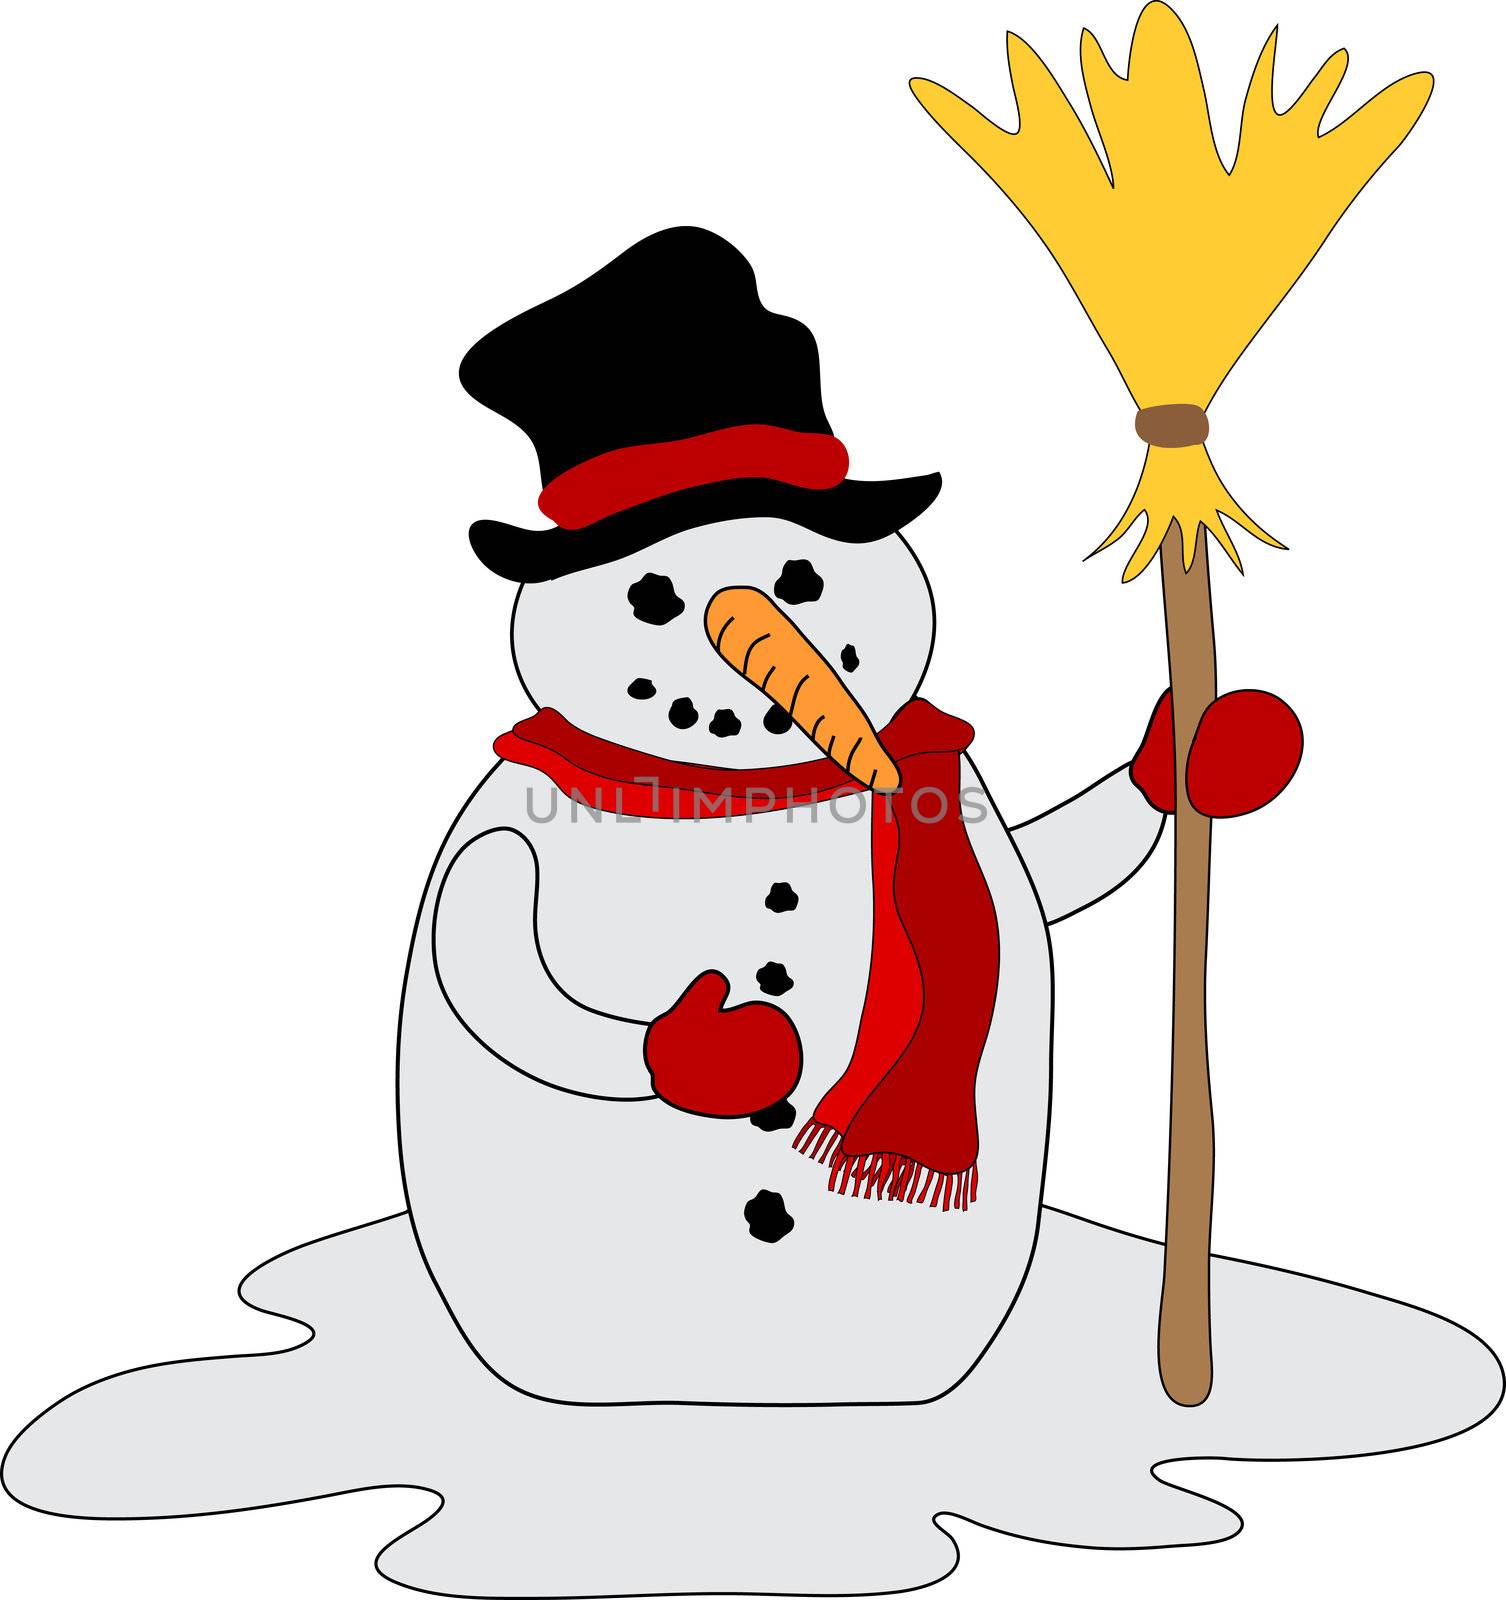 Snowman with broom by peromarketing